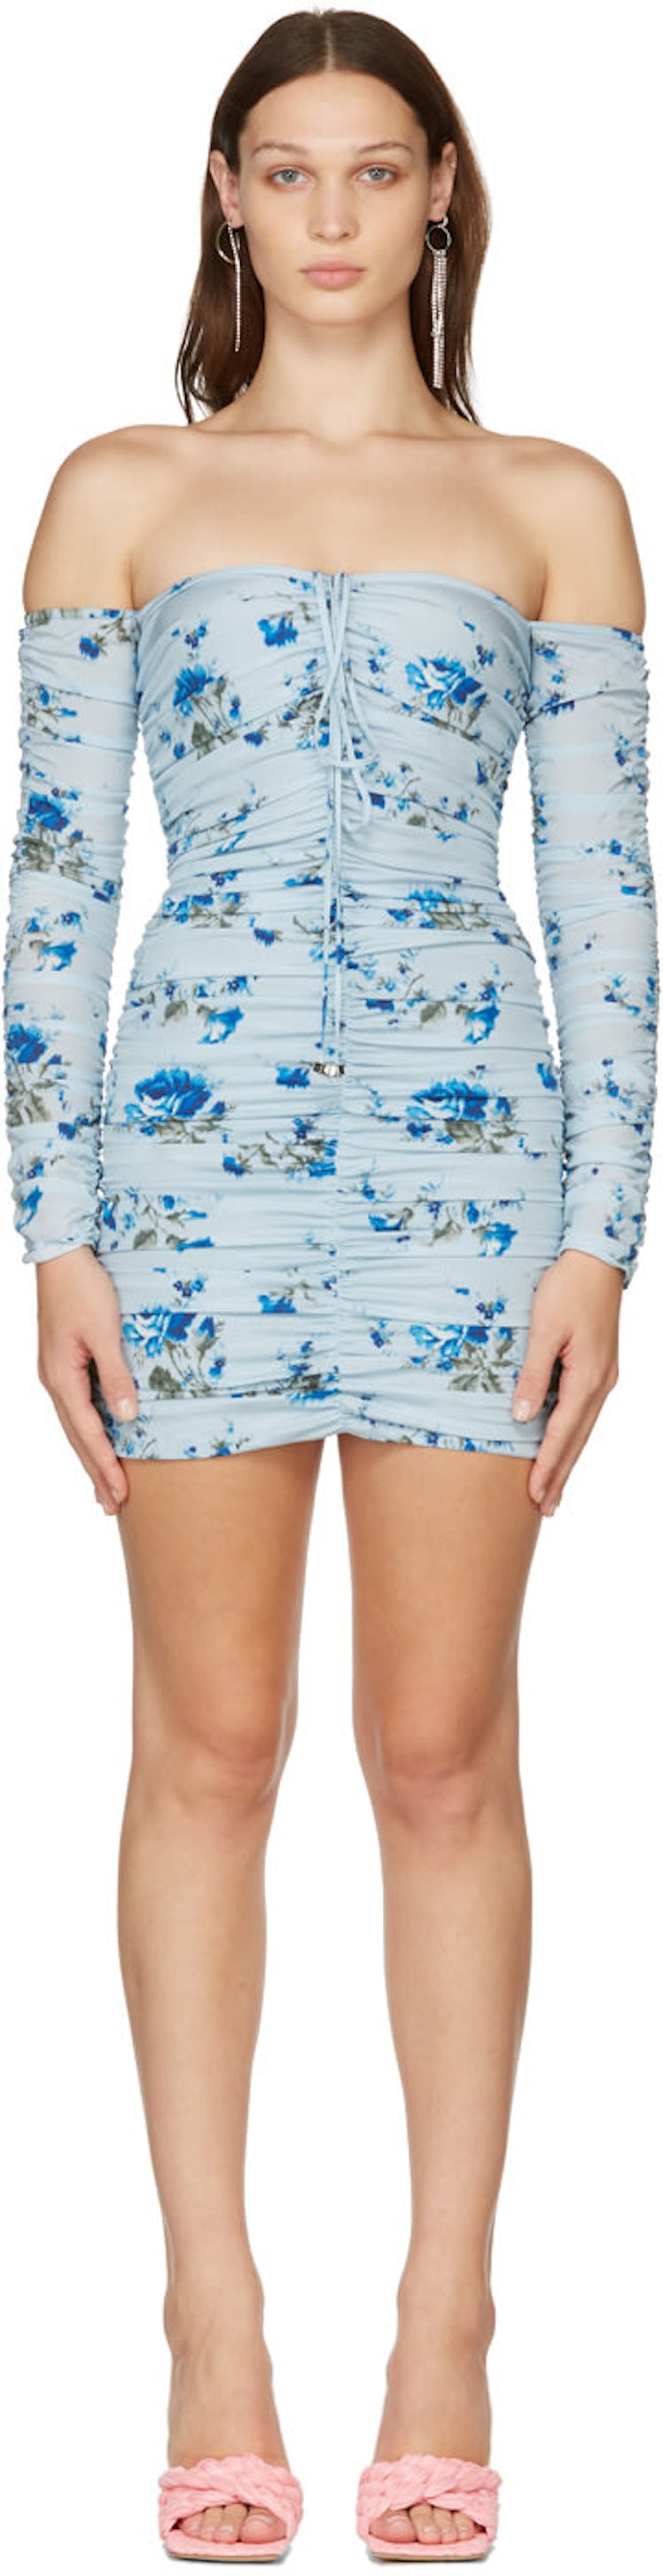 Blue Crepe De Chine Rose Dress from Blumarine, available to shop on SSENSE.